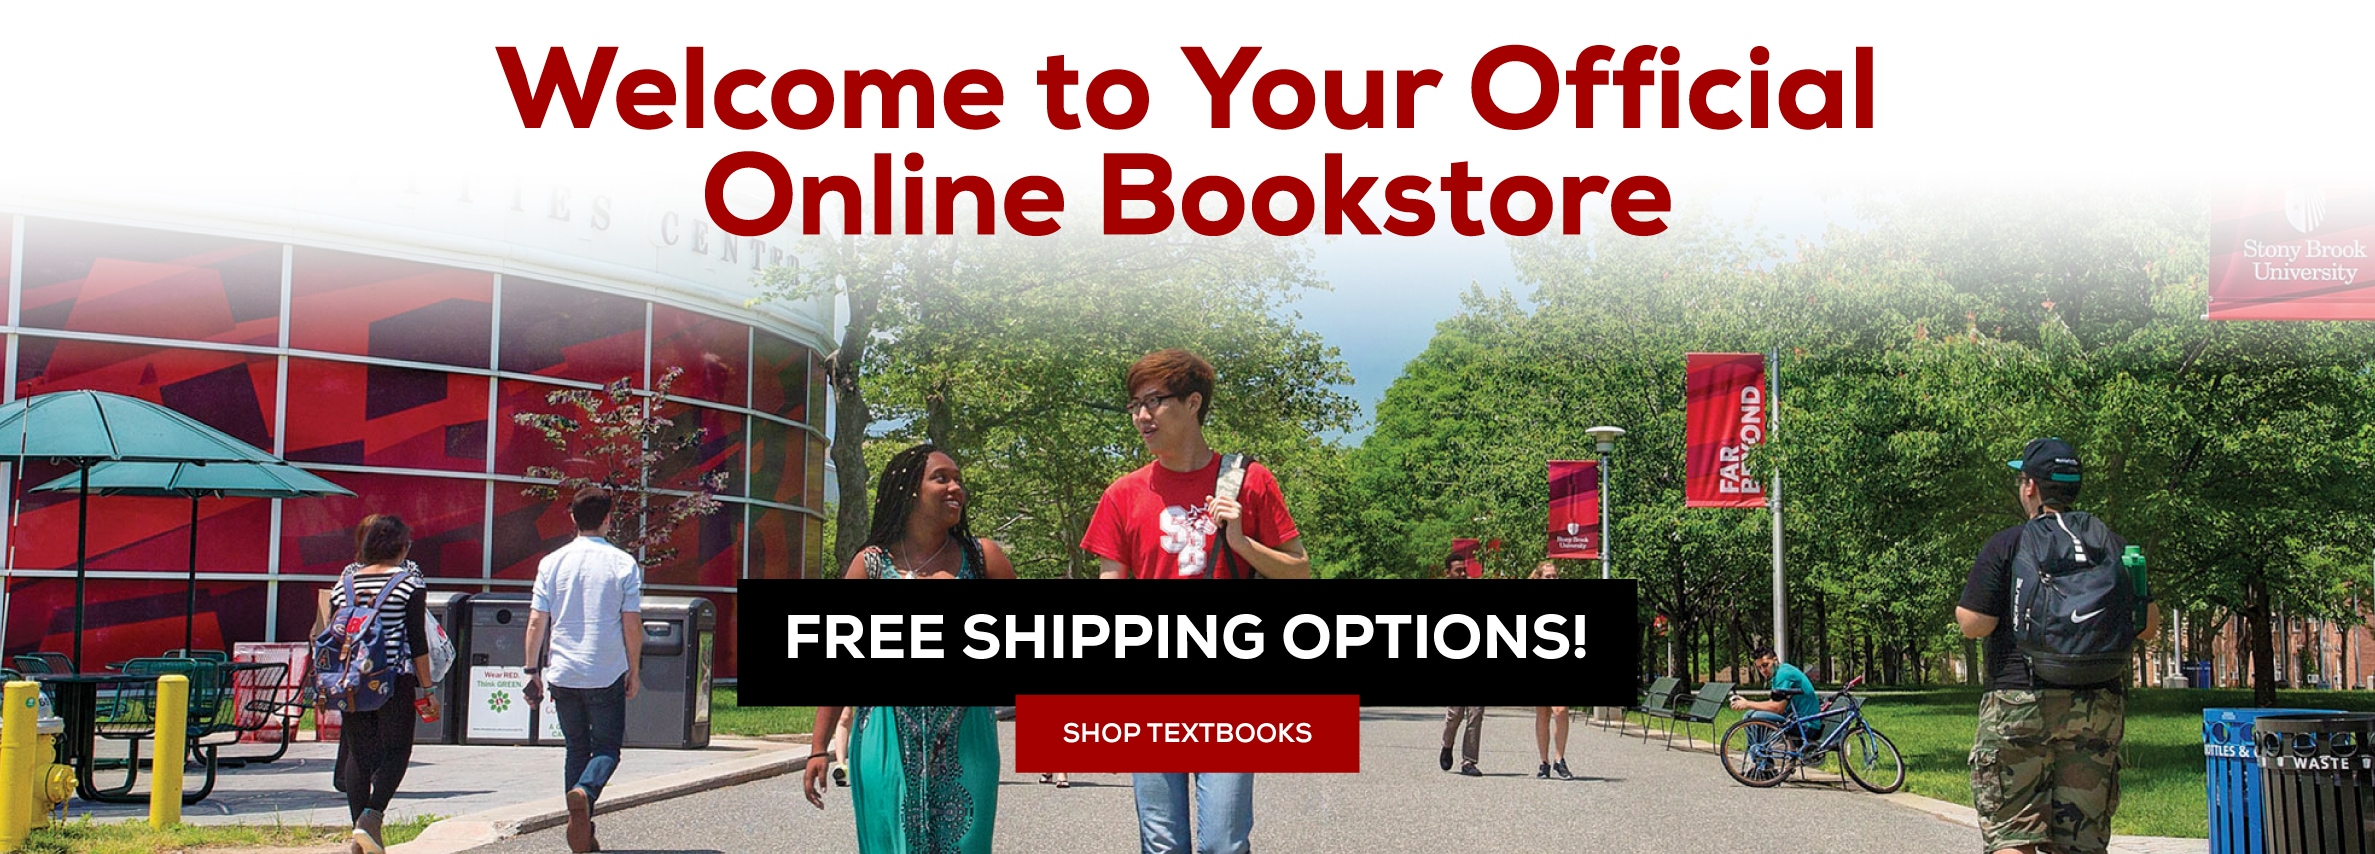 Welcome to Your Official Online Bookstore. Free shipping options. Shop Textbooks.